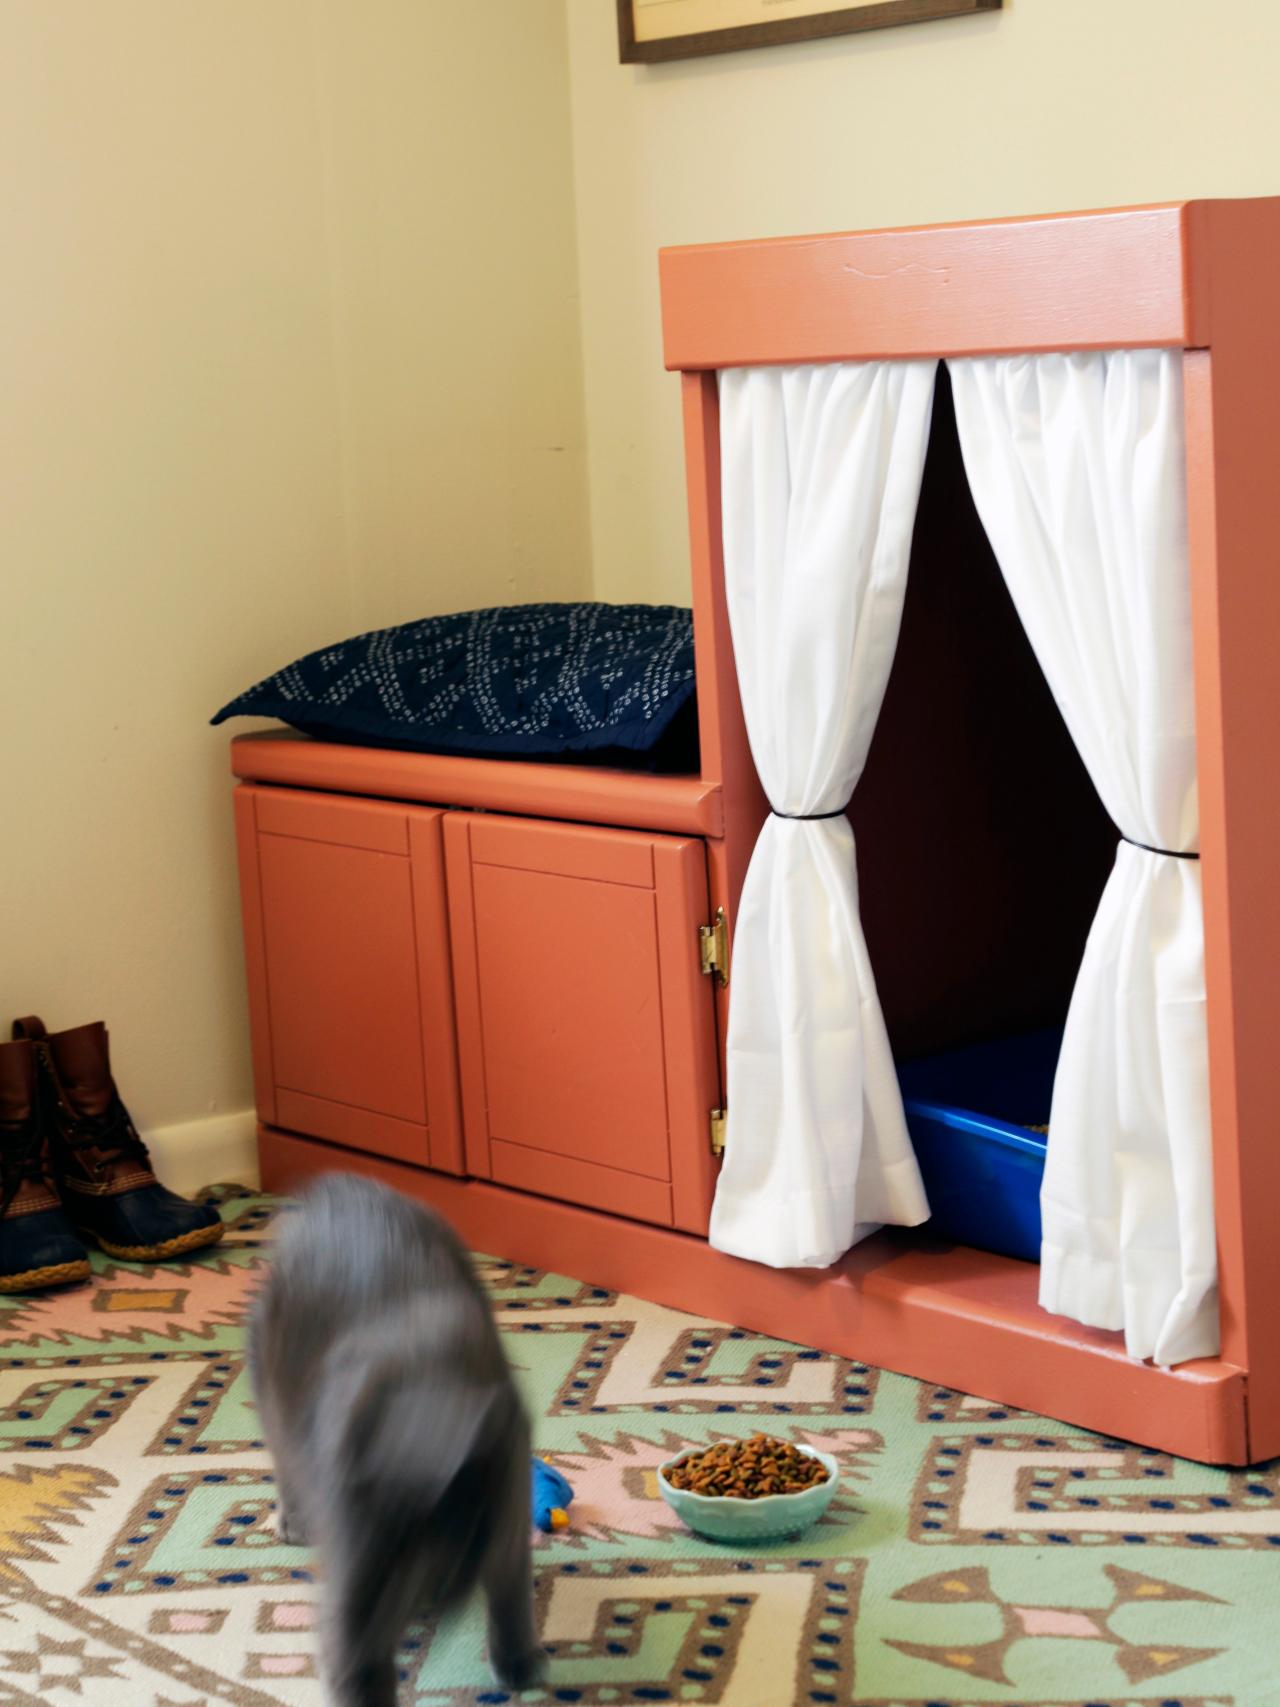 Cabinet Makeover How To Hide A Litter Box Hgtv S Decorating